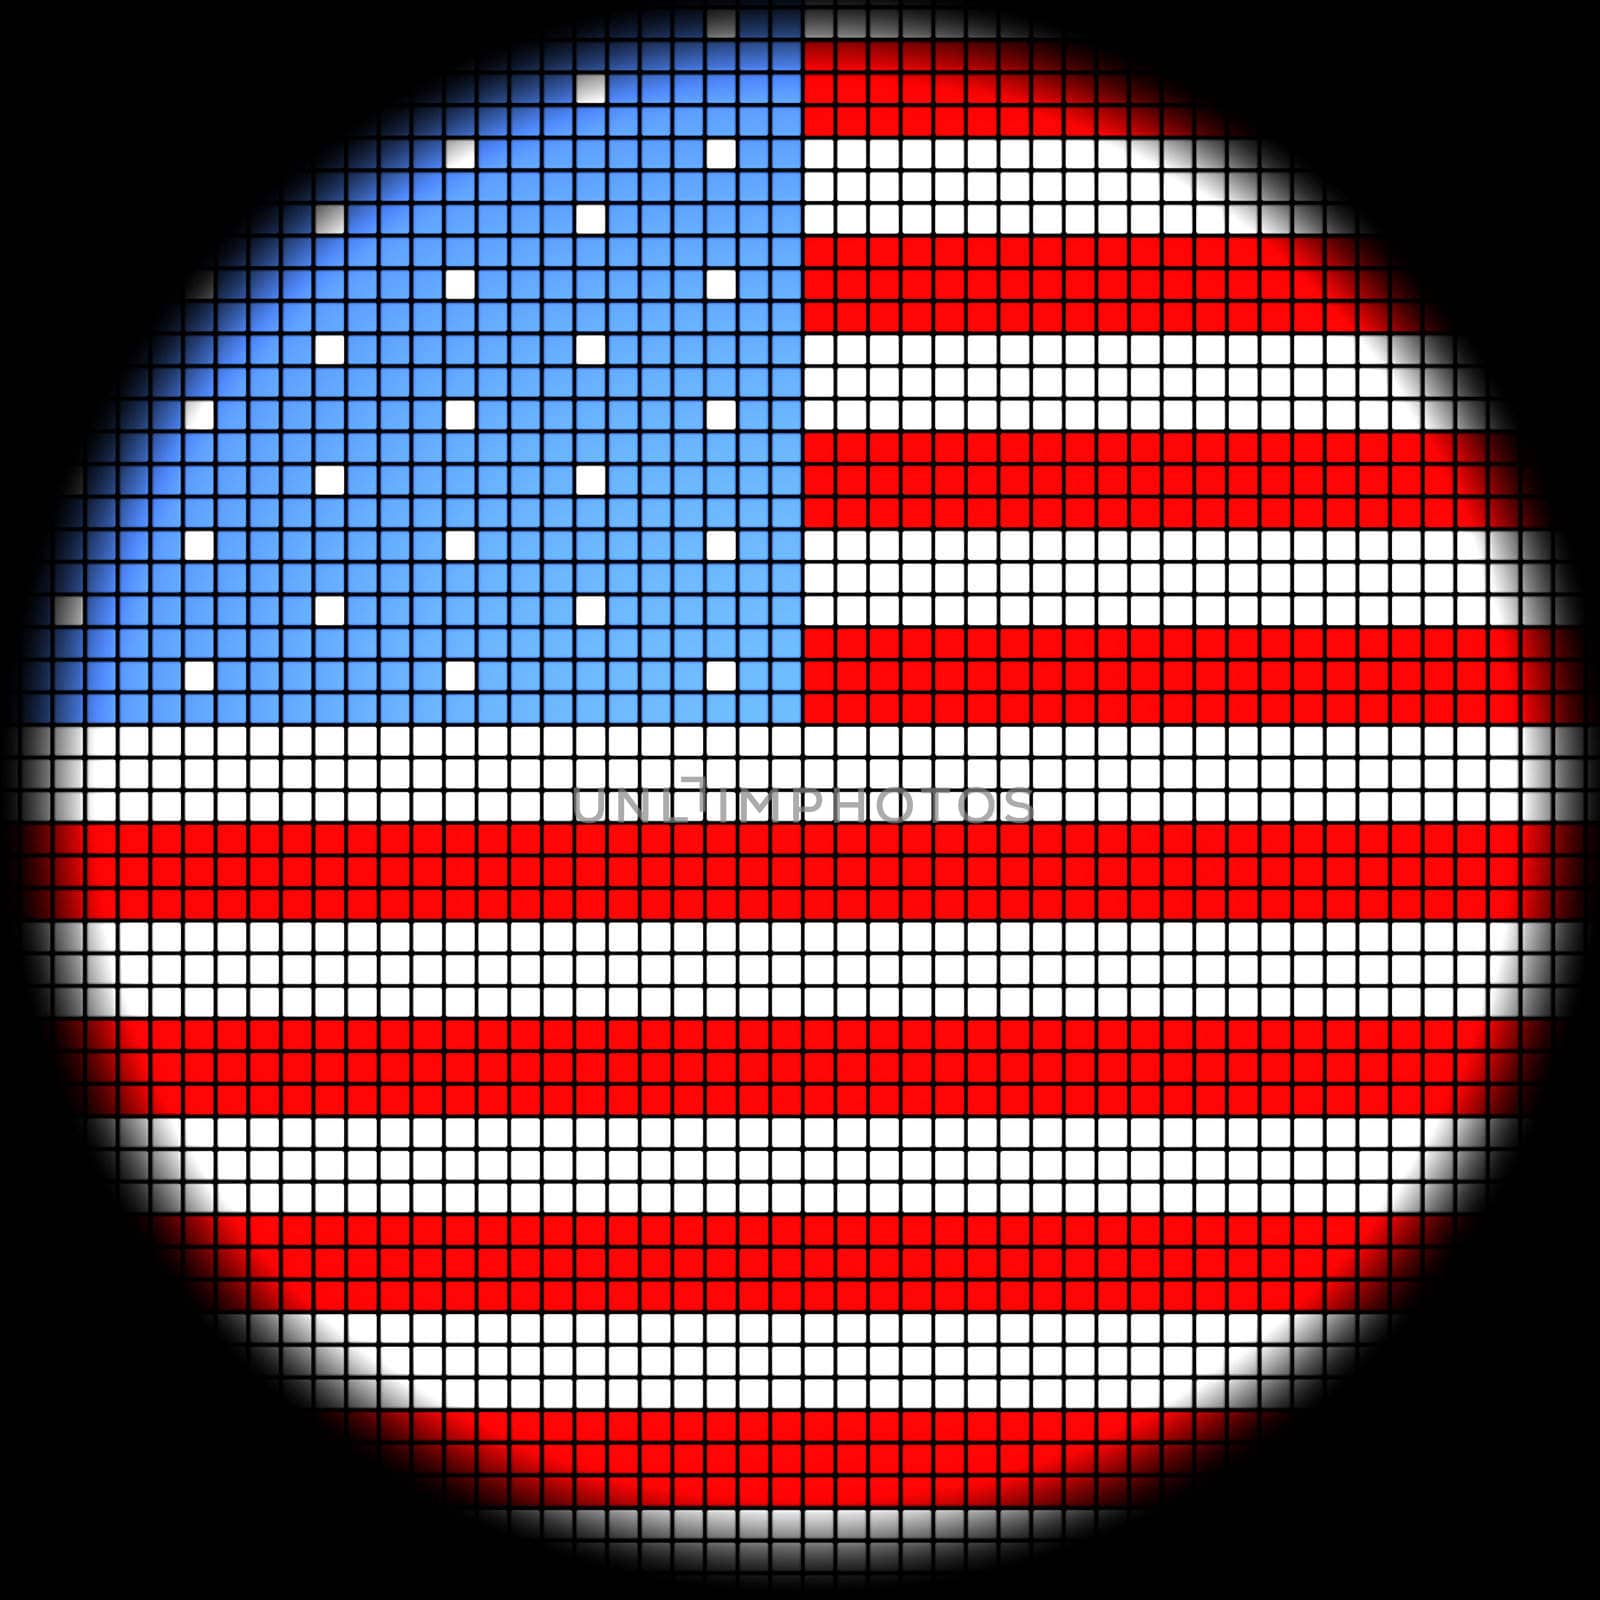 American Flag Icon on Checkered Background